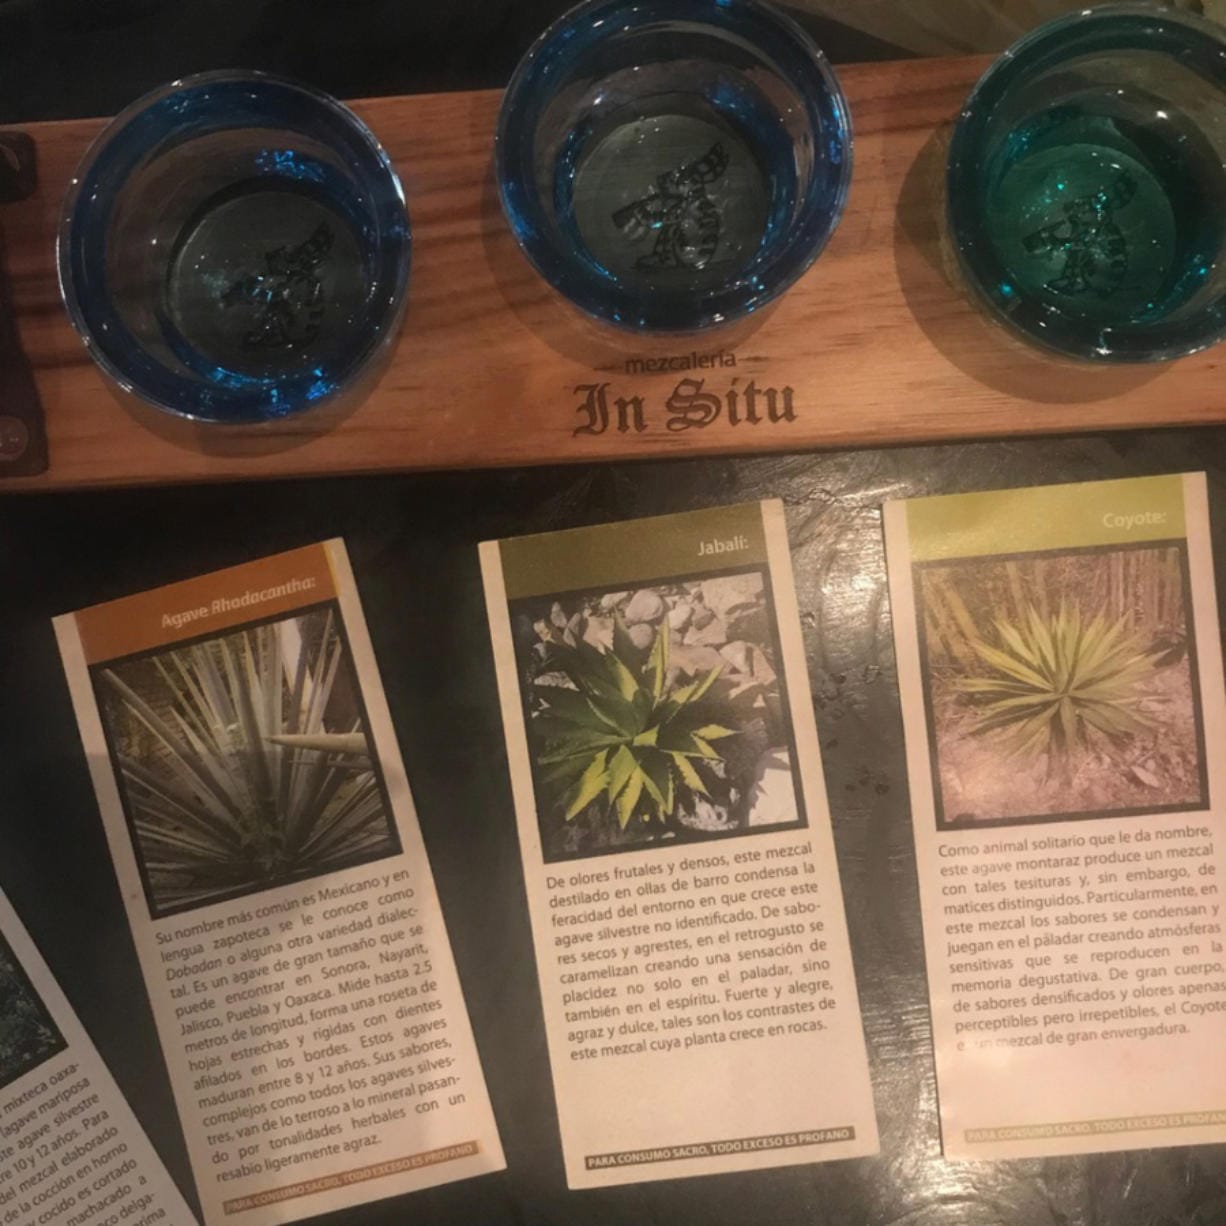 Mezcal tasting at In Situ in Oaxaca city. Mezcal and tequila are both made from agave, but are produced in different regions of Mexico using different methods.